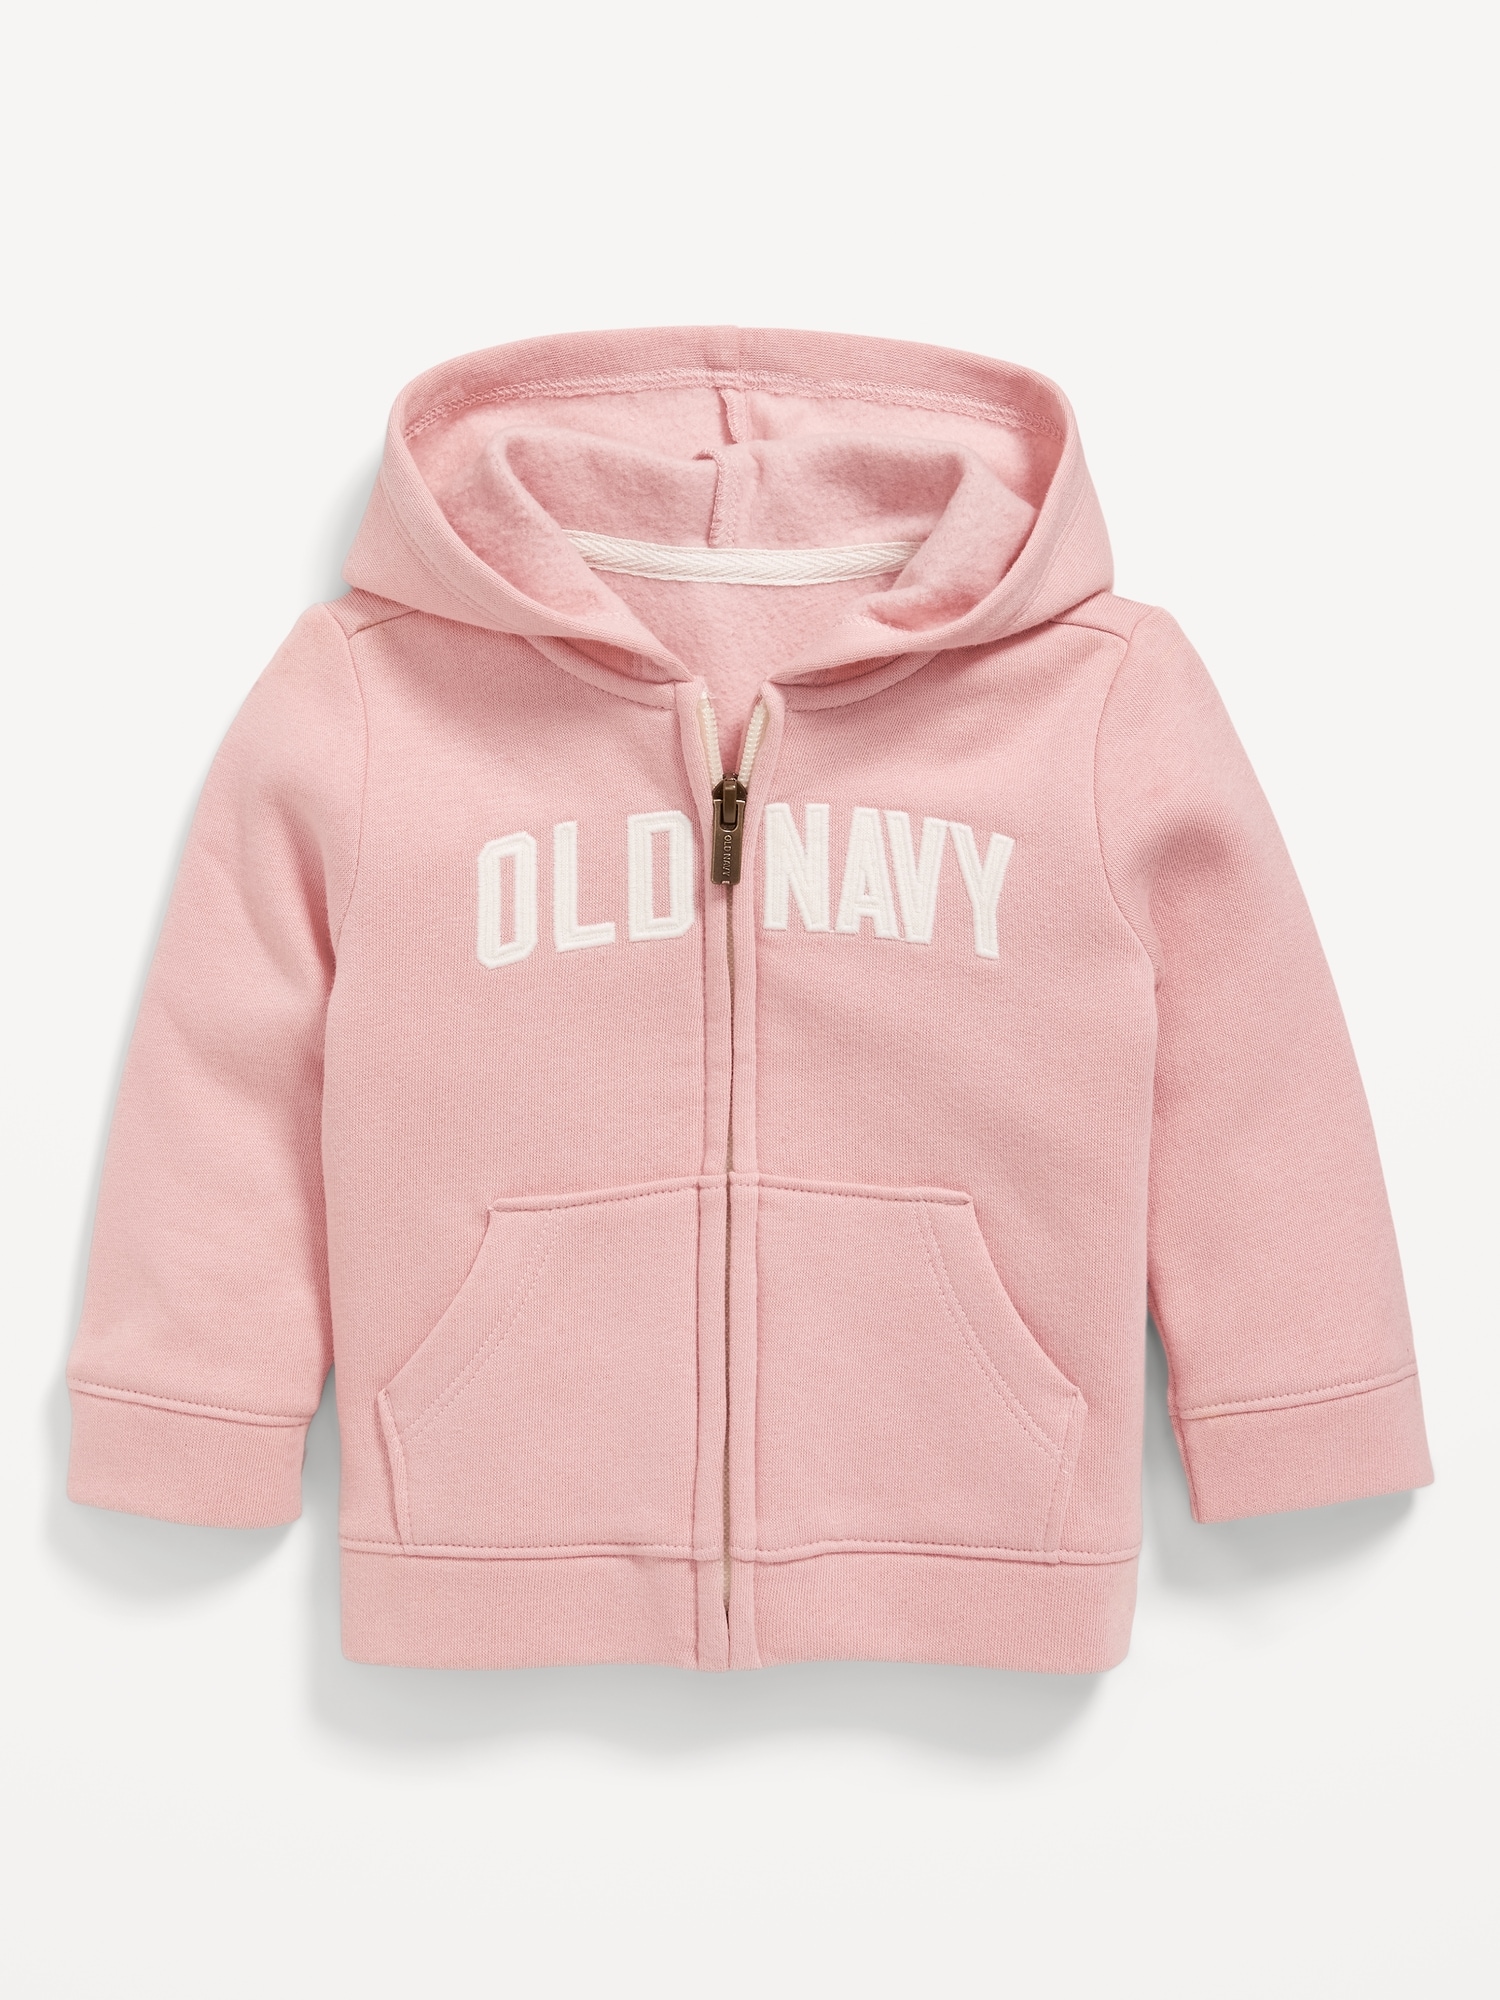 Logo-Graphic Zip Hoodie for Baby